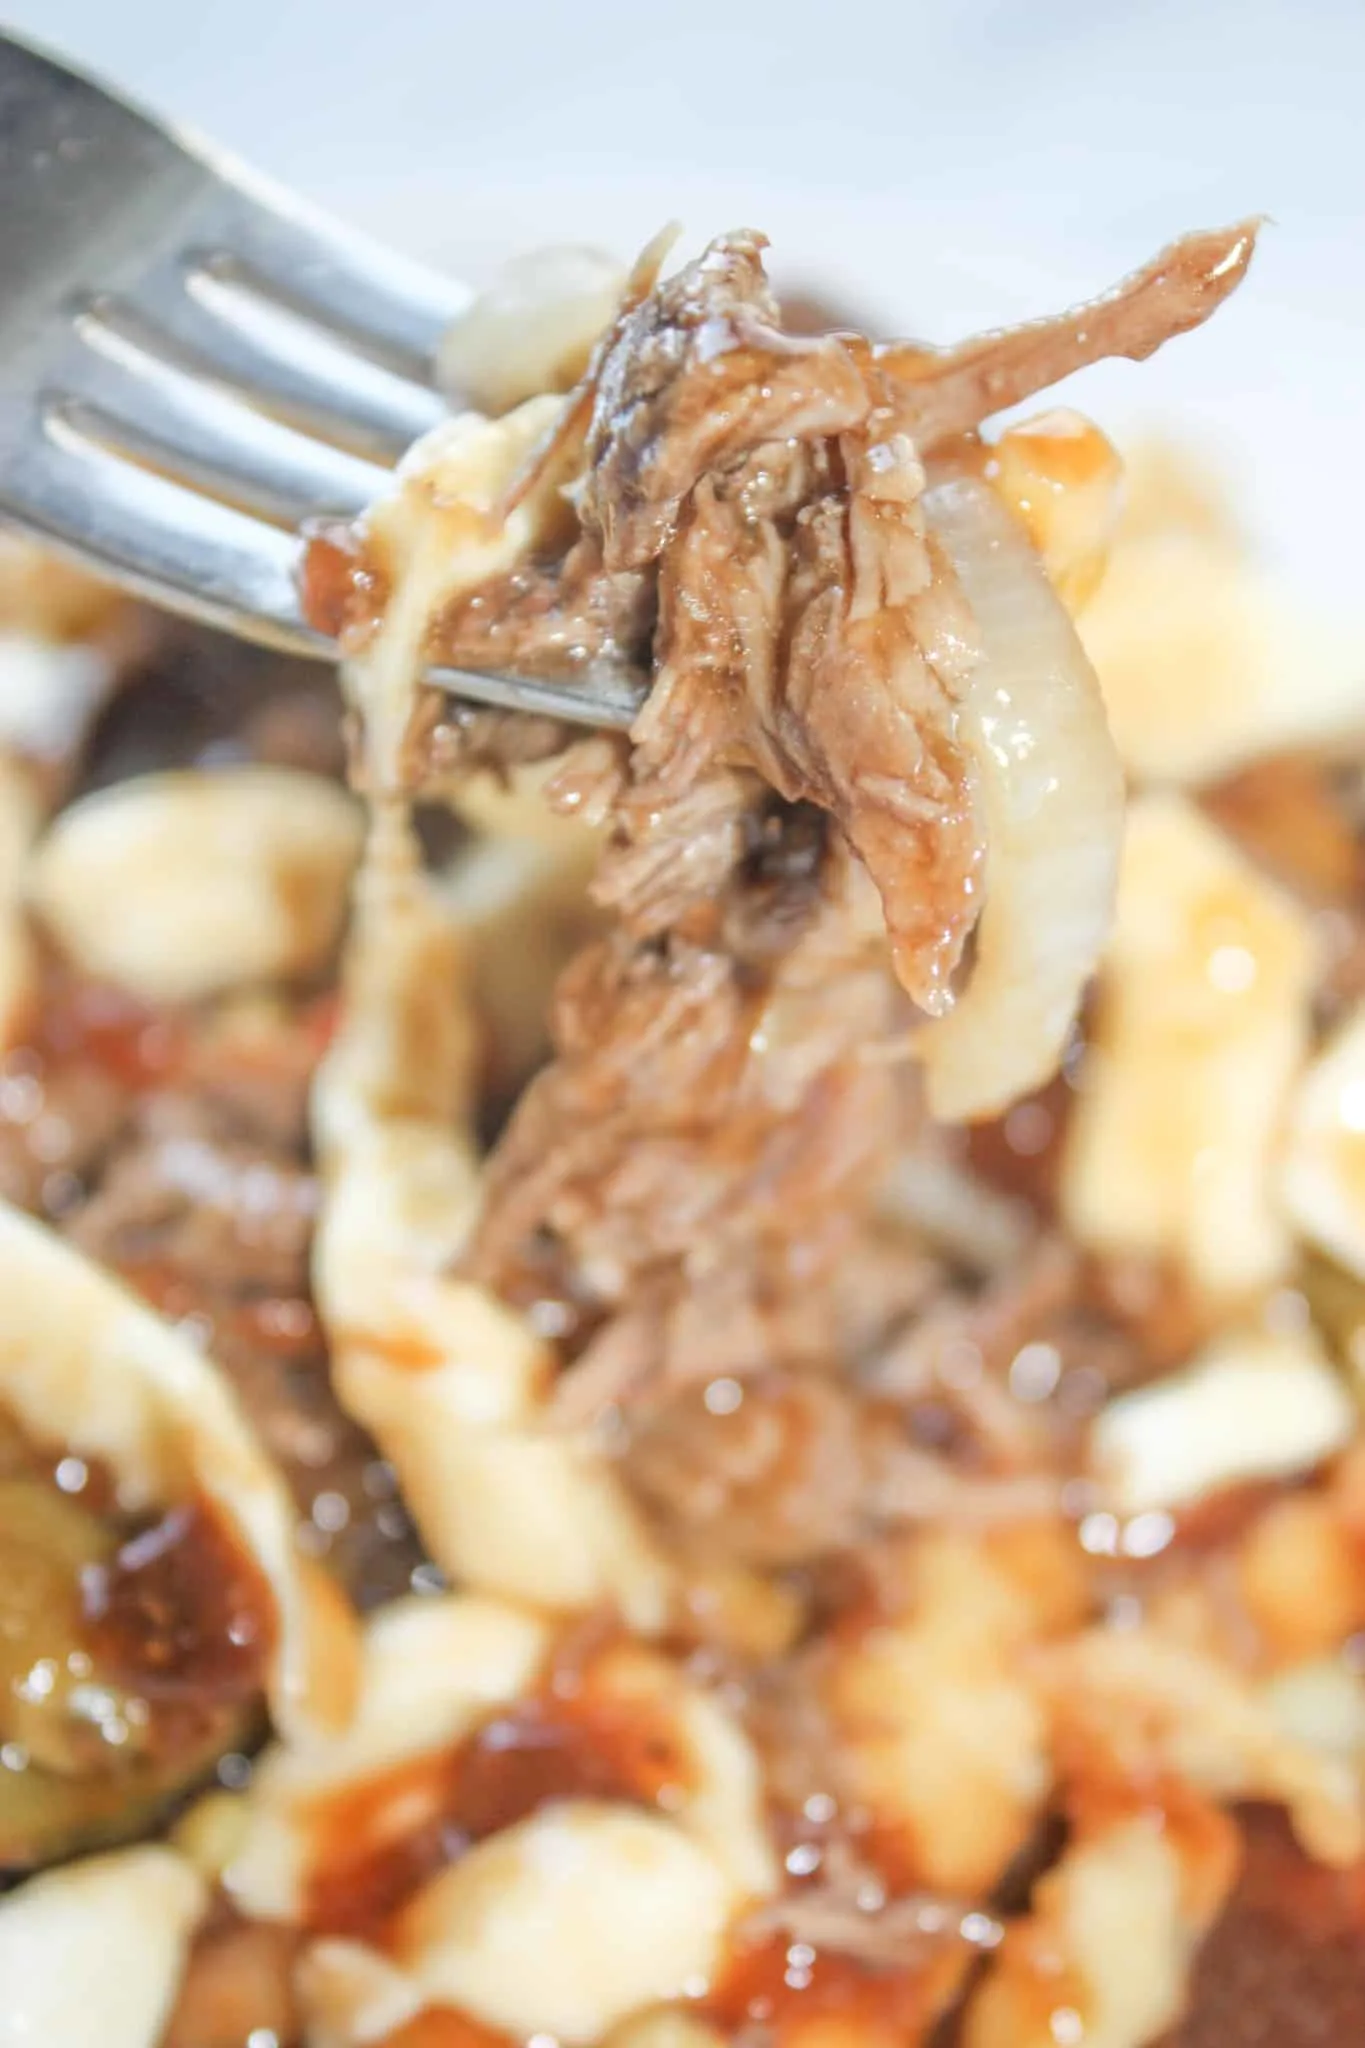 Roast Beef Dinner Poutine is a very tasty way to use up leftover roast beef from that big Sunday dinner.  Make sure to use gluten free gravy packets and you are good to go!